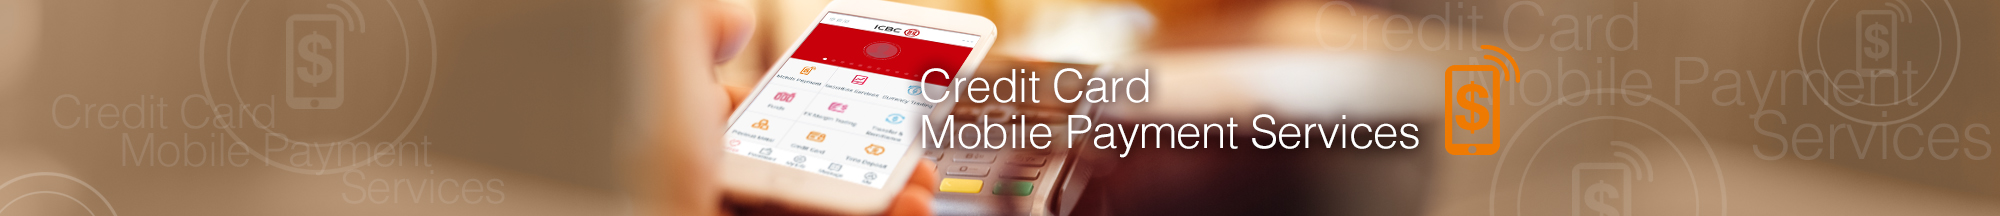 Credit Card Mobile Payment Services